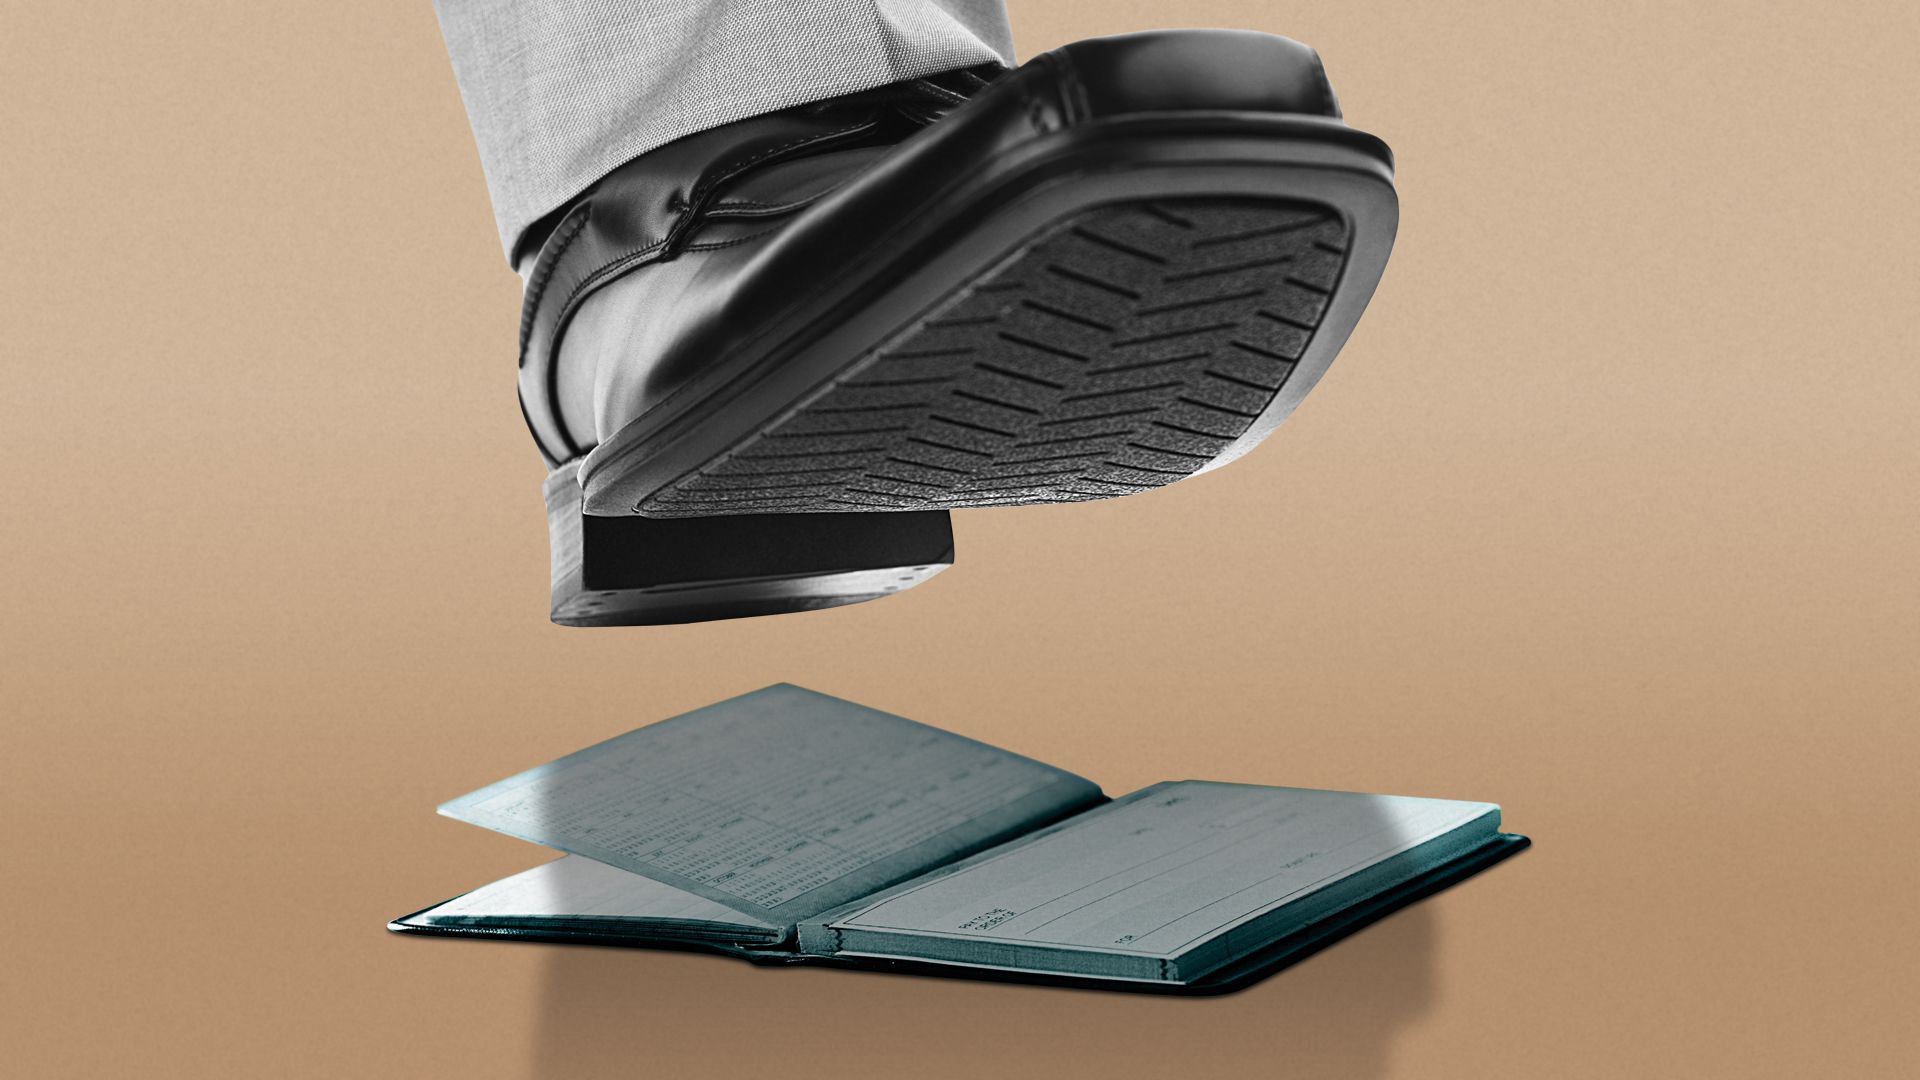 Illustration of a dress shoe about to step on an open checkbook.